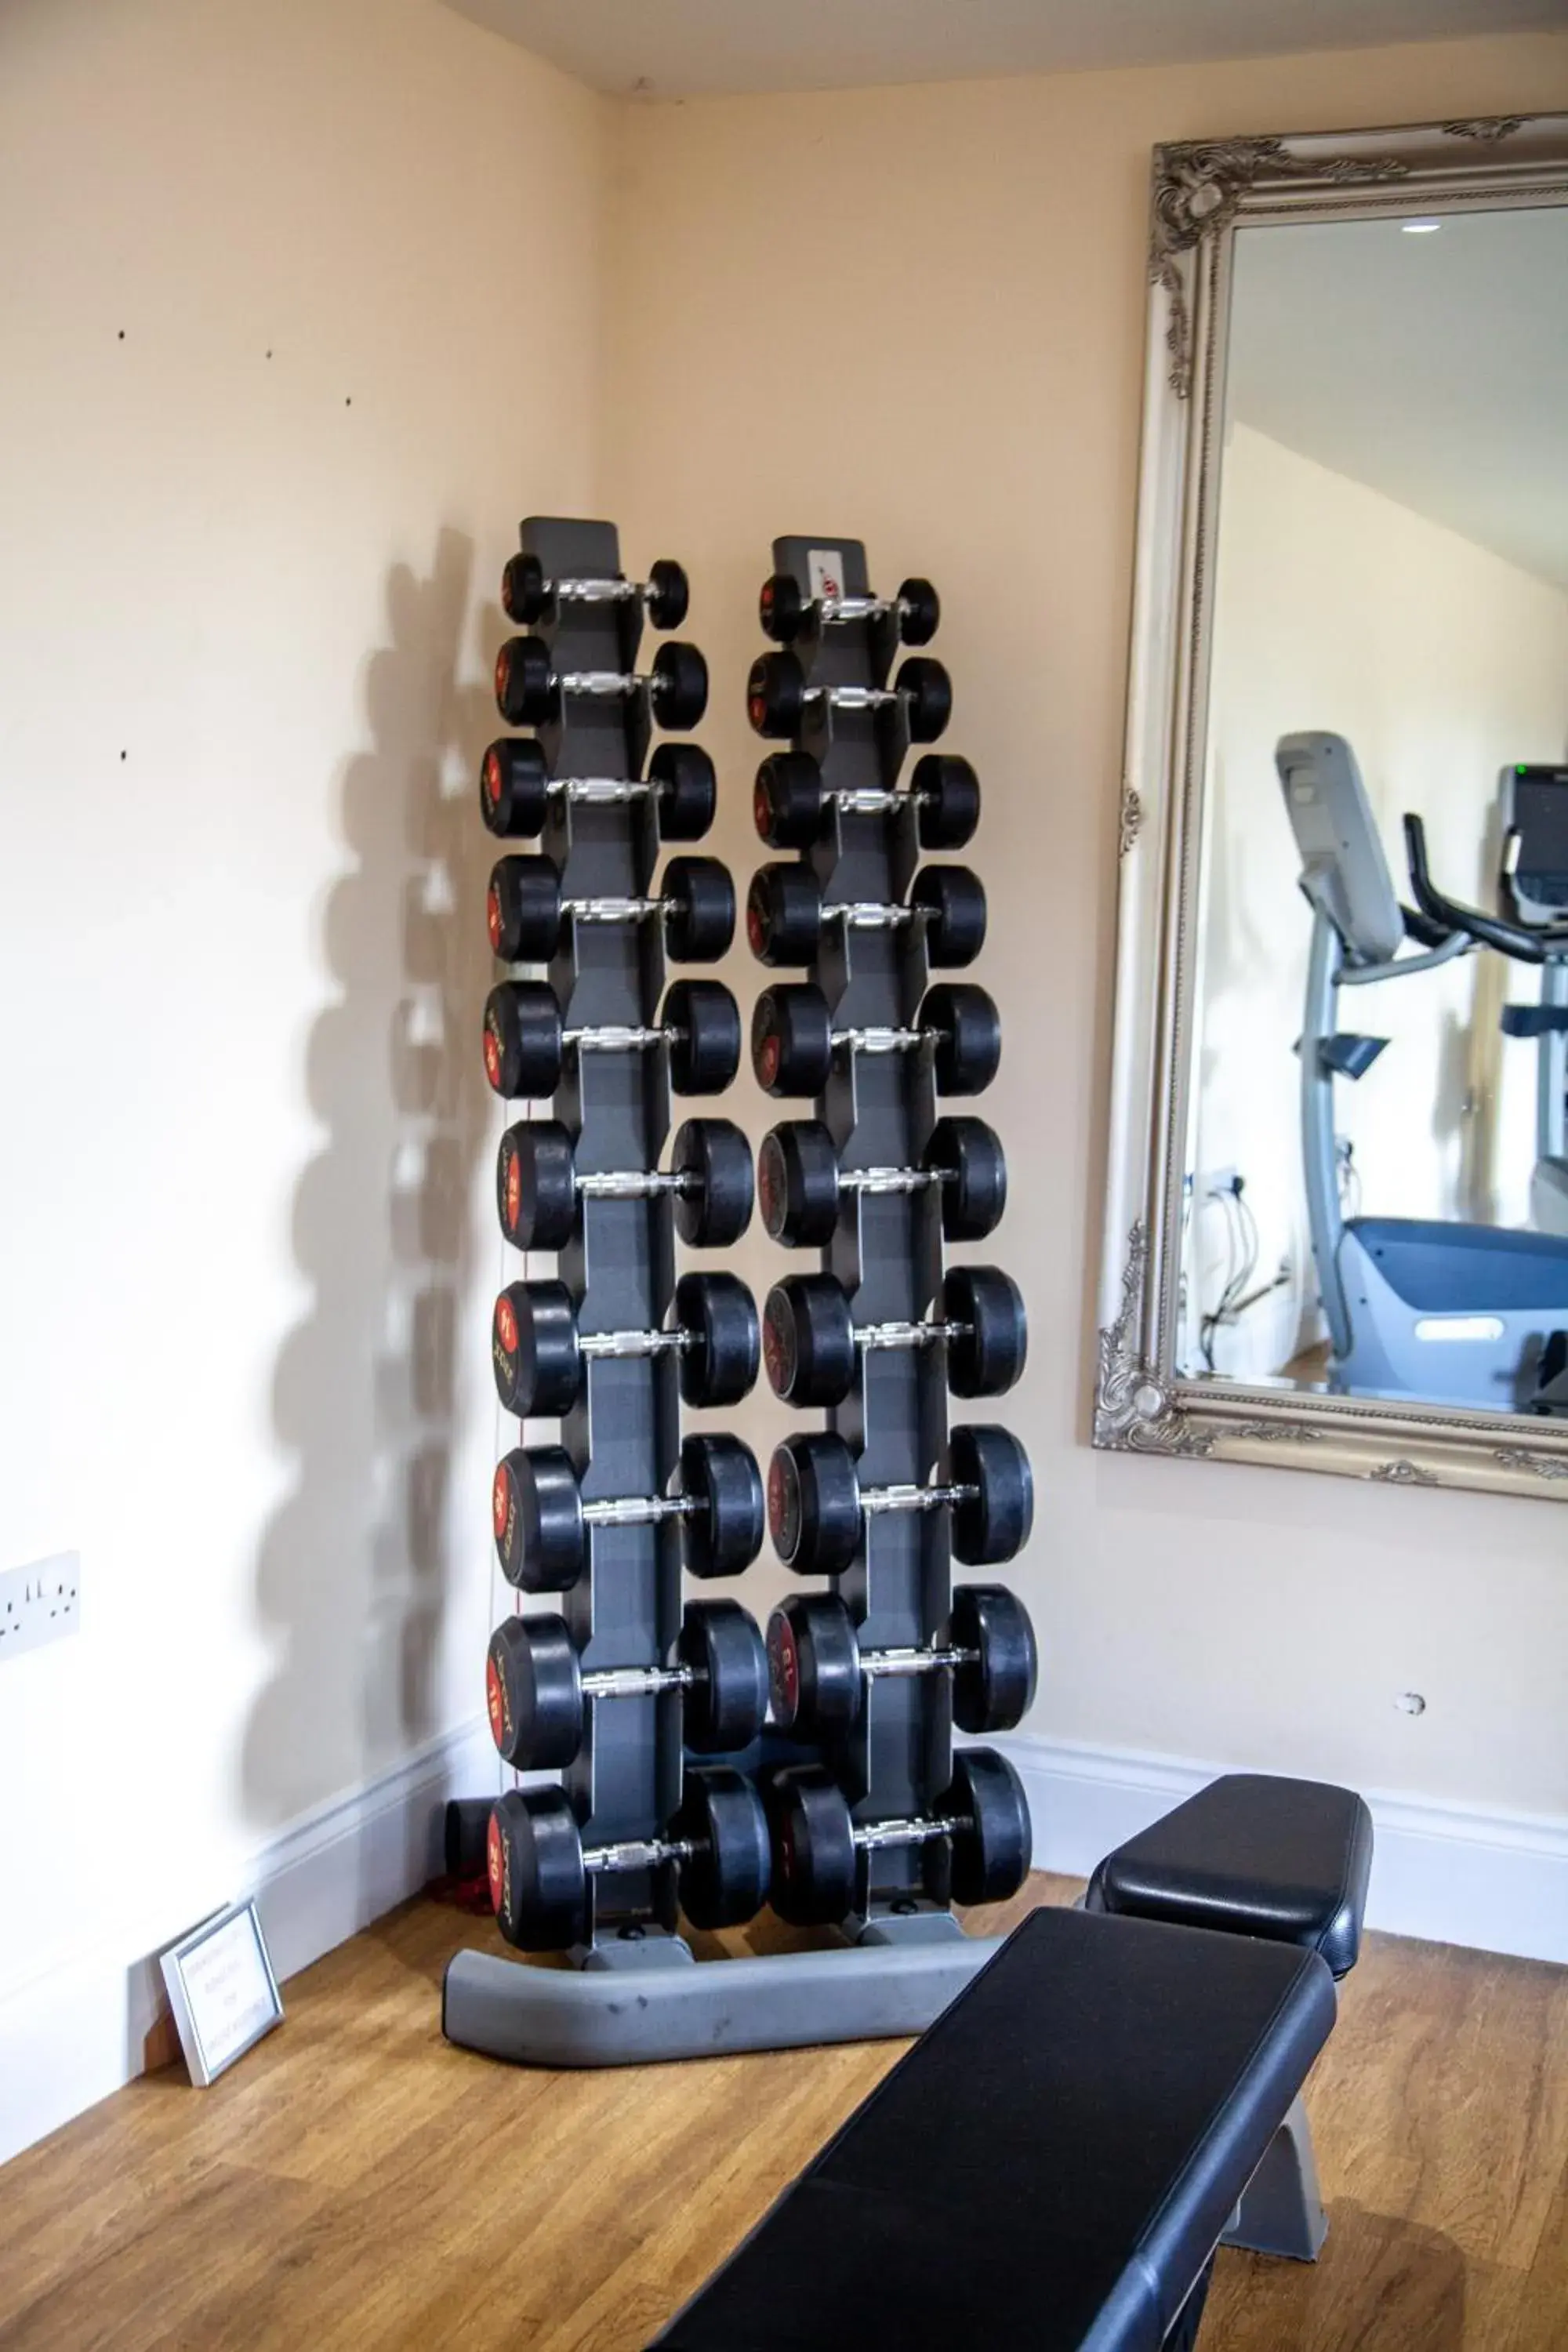 Fitness centre/facilities, Fitness Center/Facilities in Best Western Brome Grange Hotel